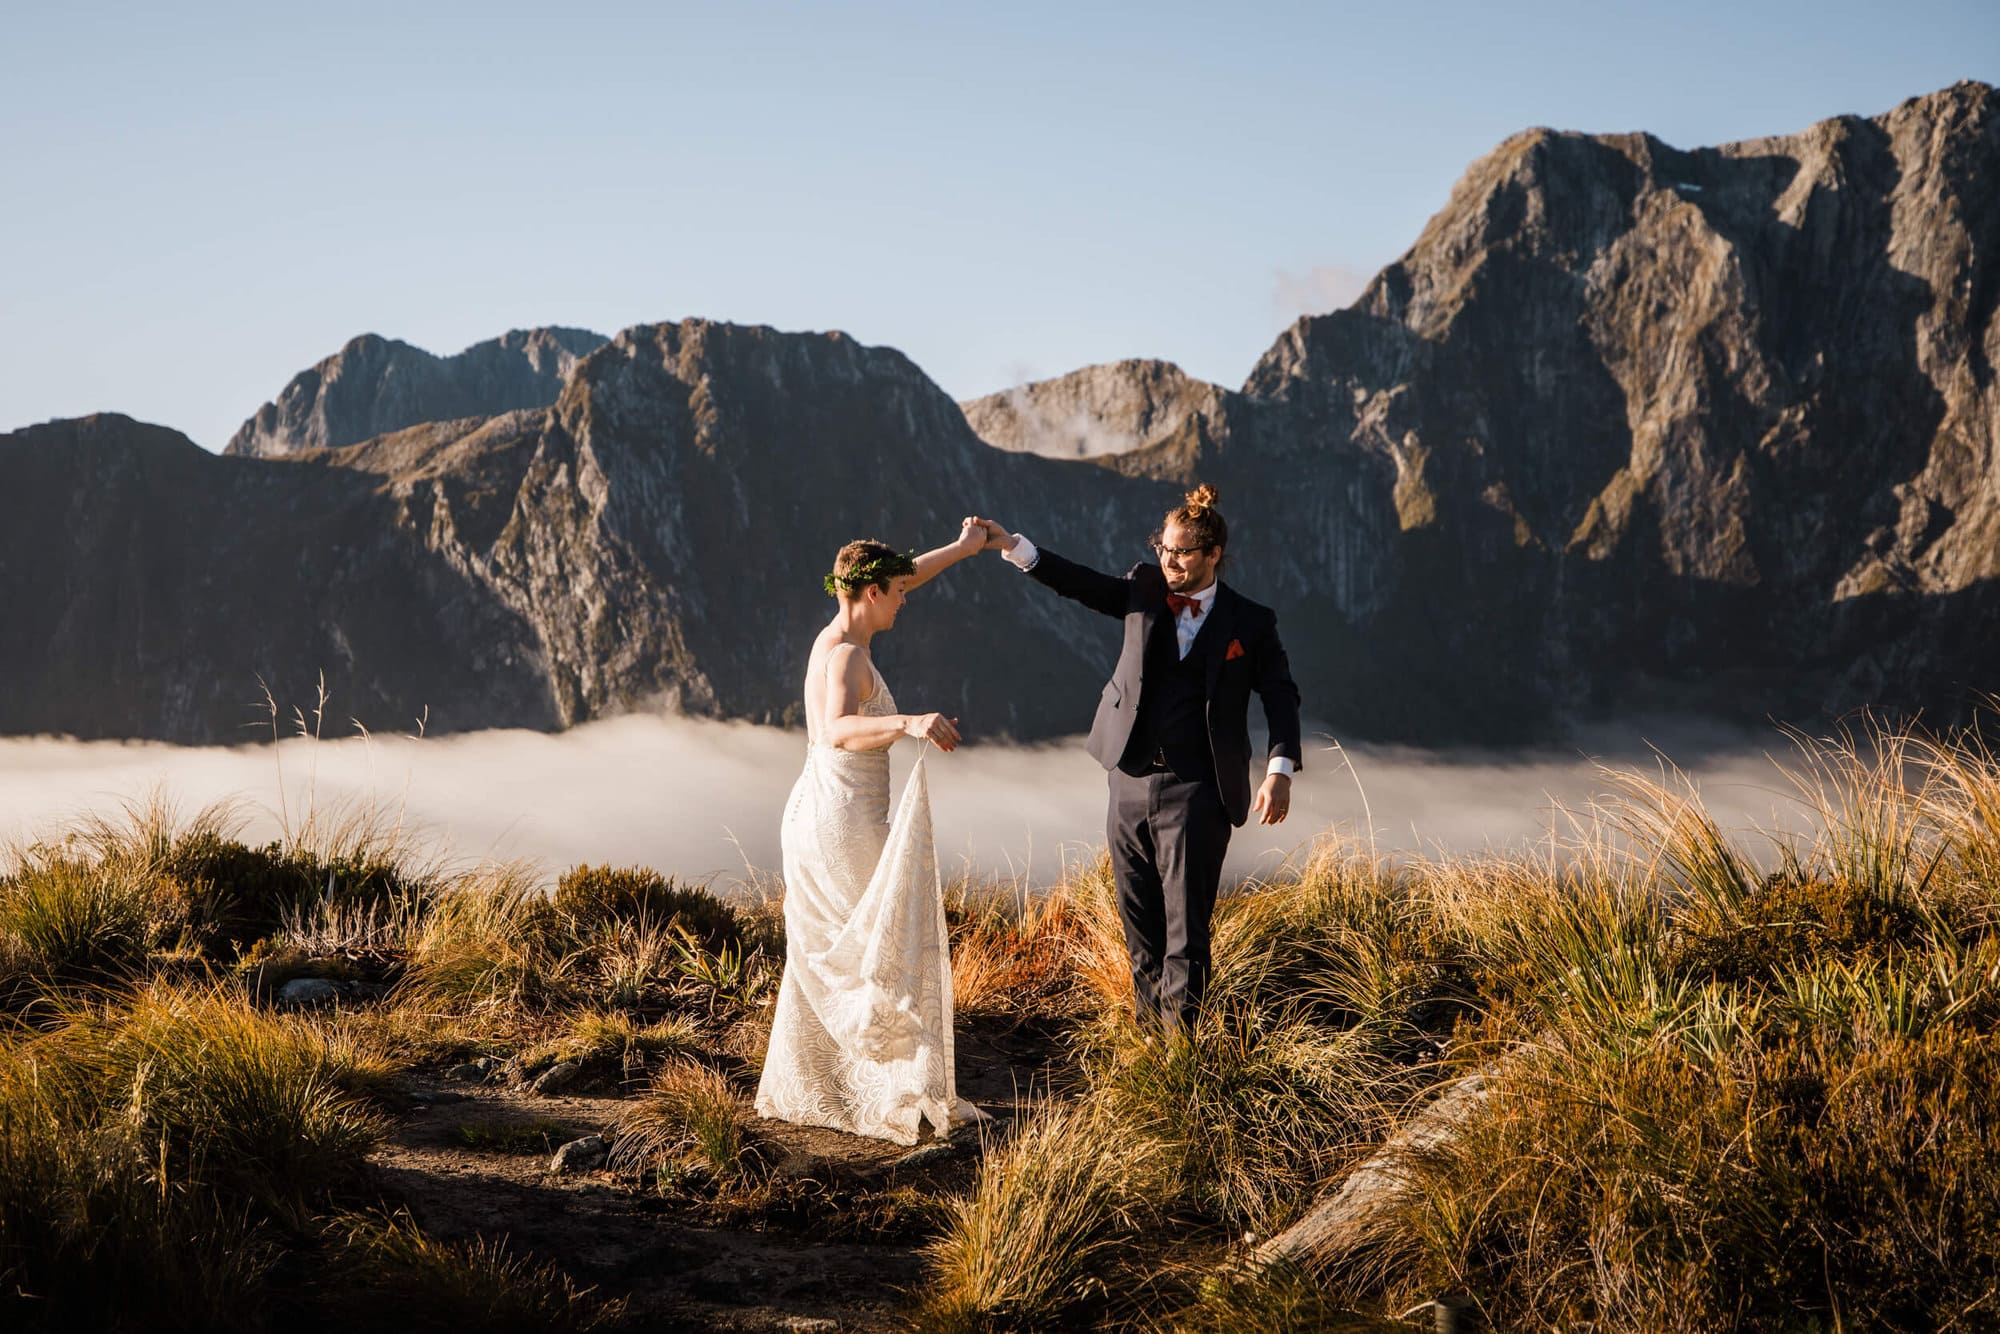 This New Zealand Heli-Wedding has it all- a cloud inversion, Taylor Swift, and getting semi-stranded on a mountain. See the adventure here. 